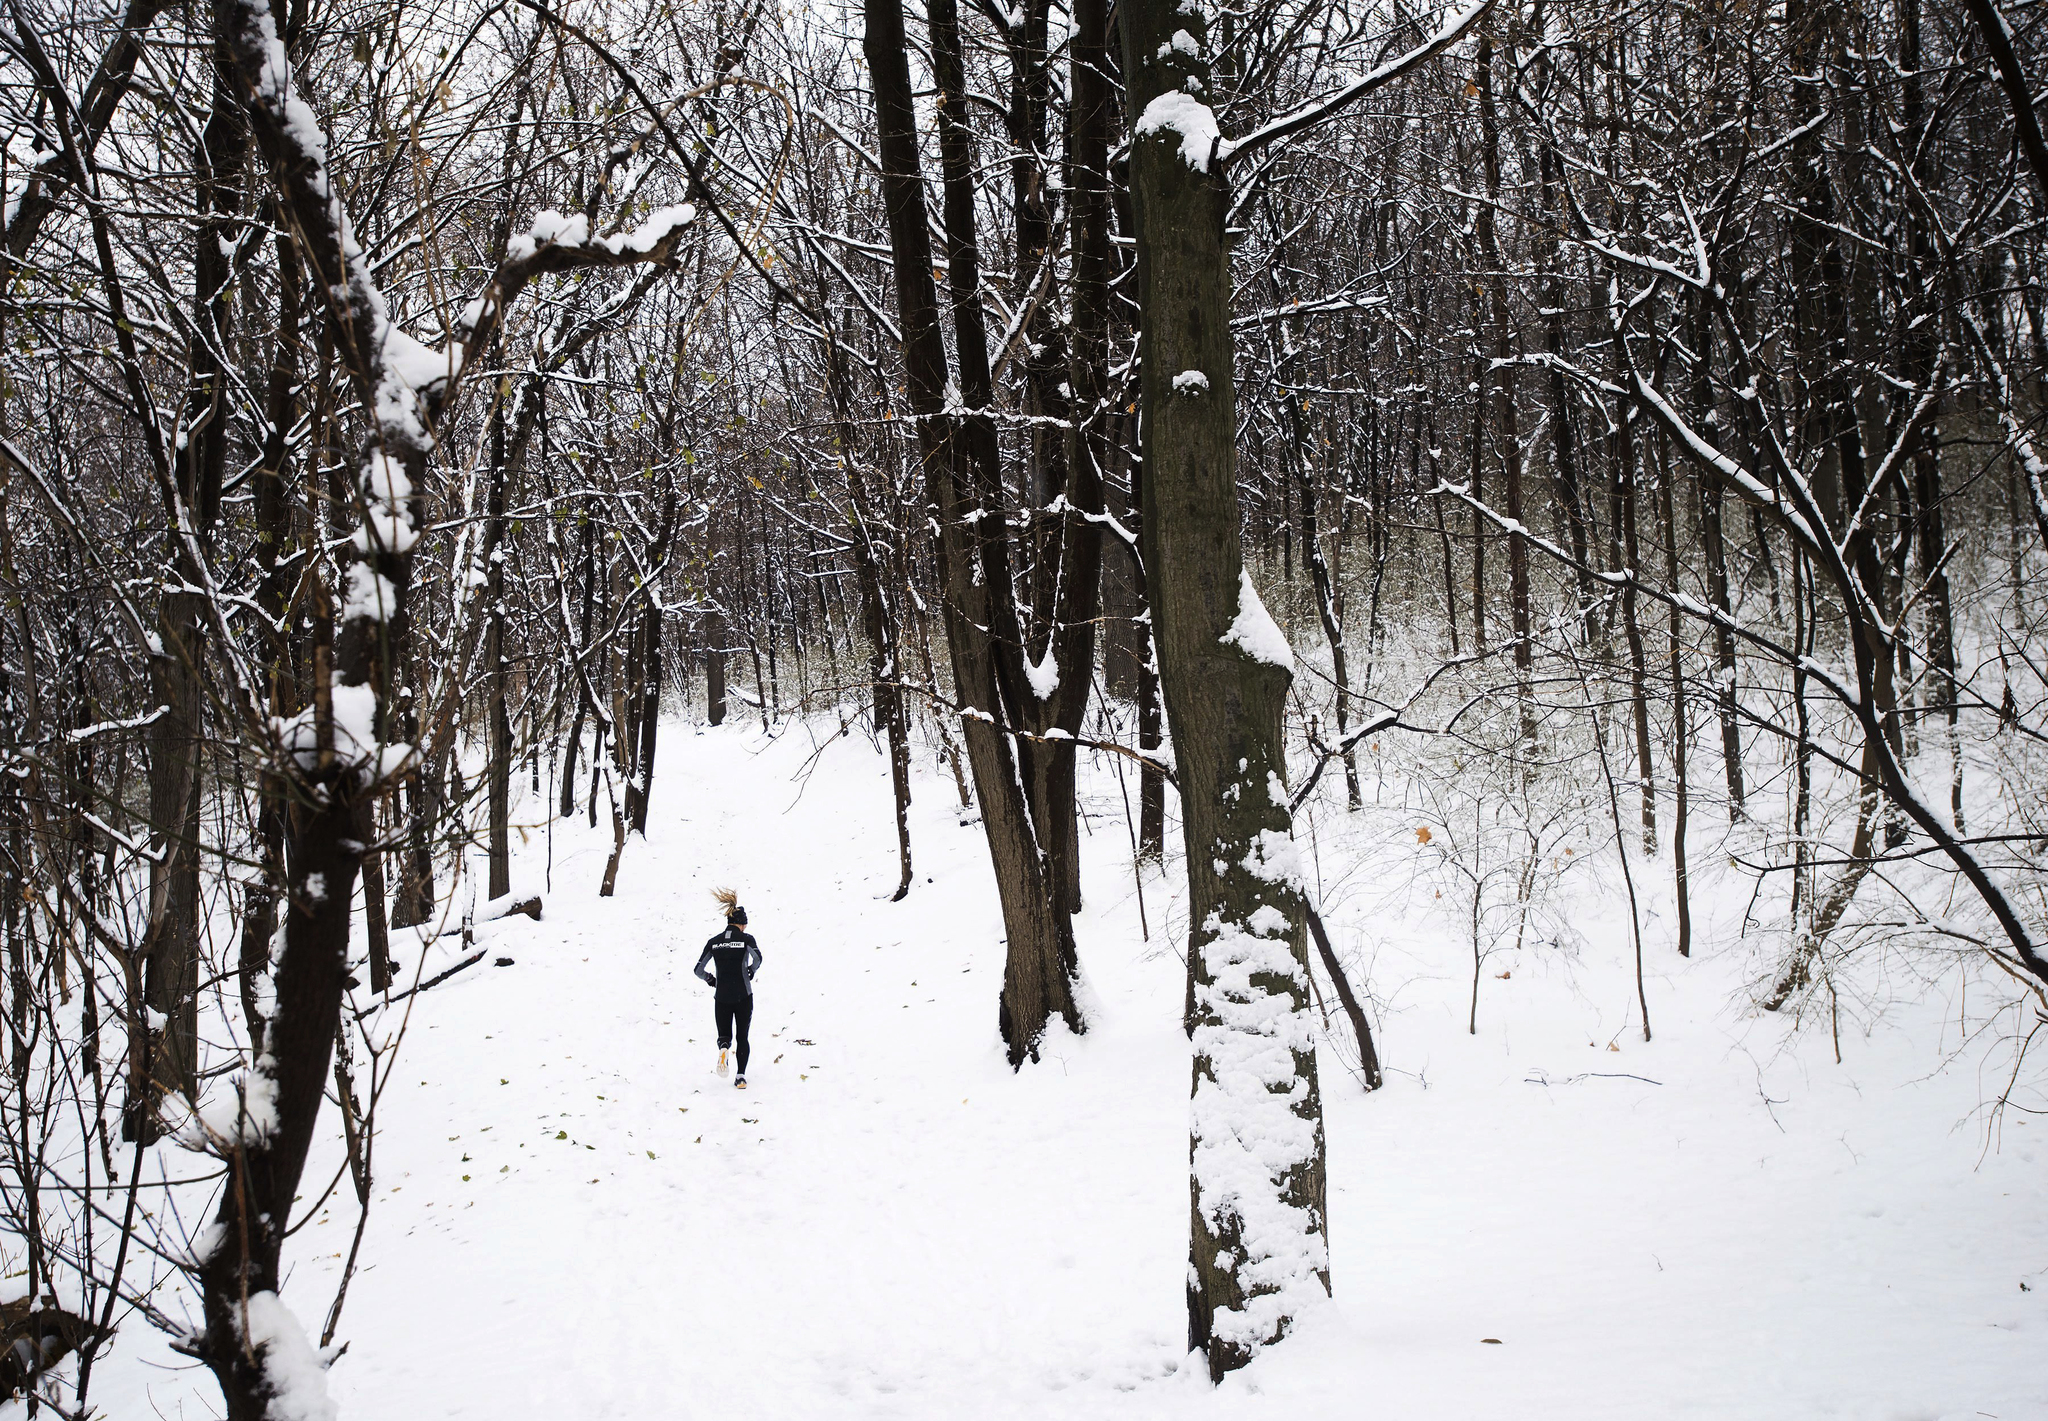 Nathan Denette | The Canadian Press In this Dec. 12, 2016 photo, a woman runs on a snowy path in High Park in Toronto. The National Oceanic and Atmospheric Administration Thursday pronounced the most recent La Nina event over as of January.